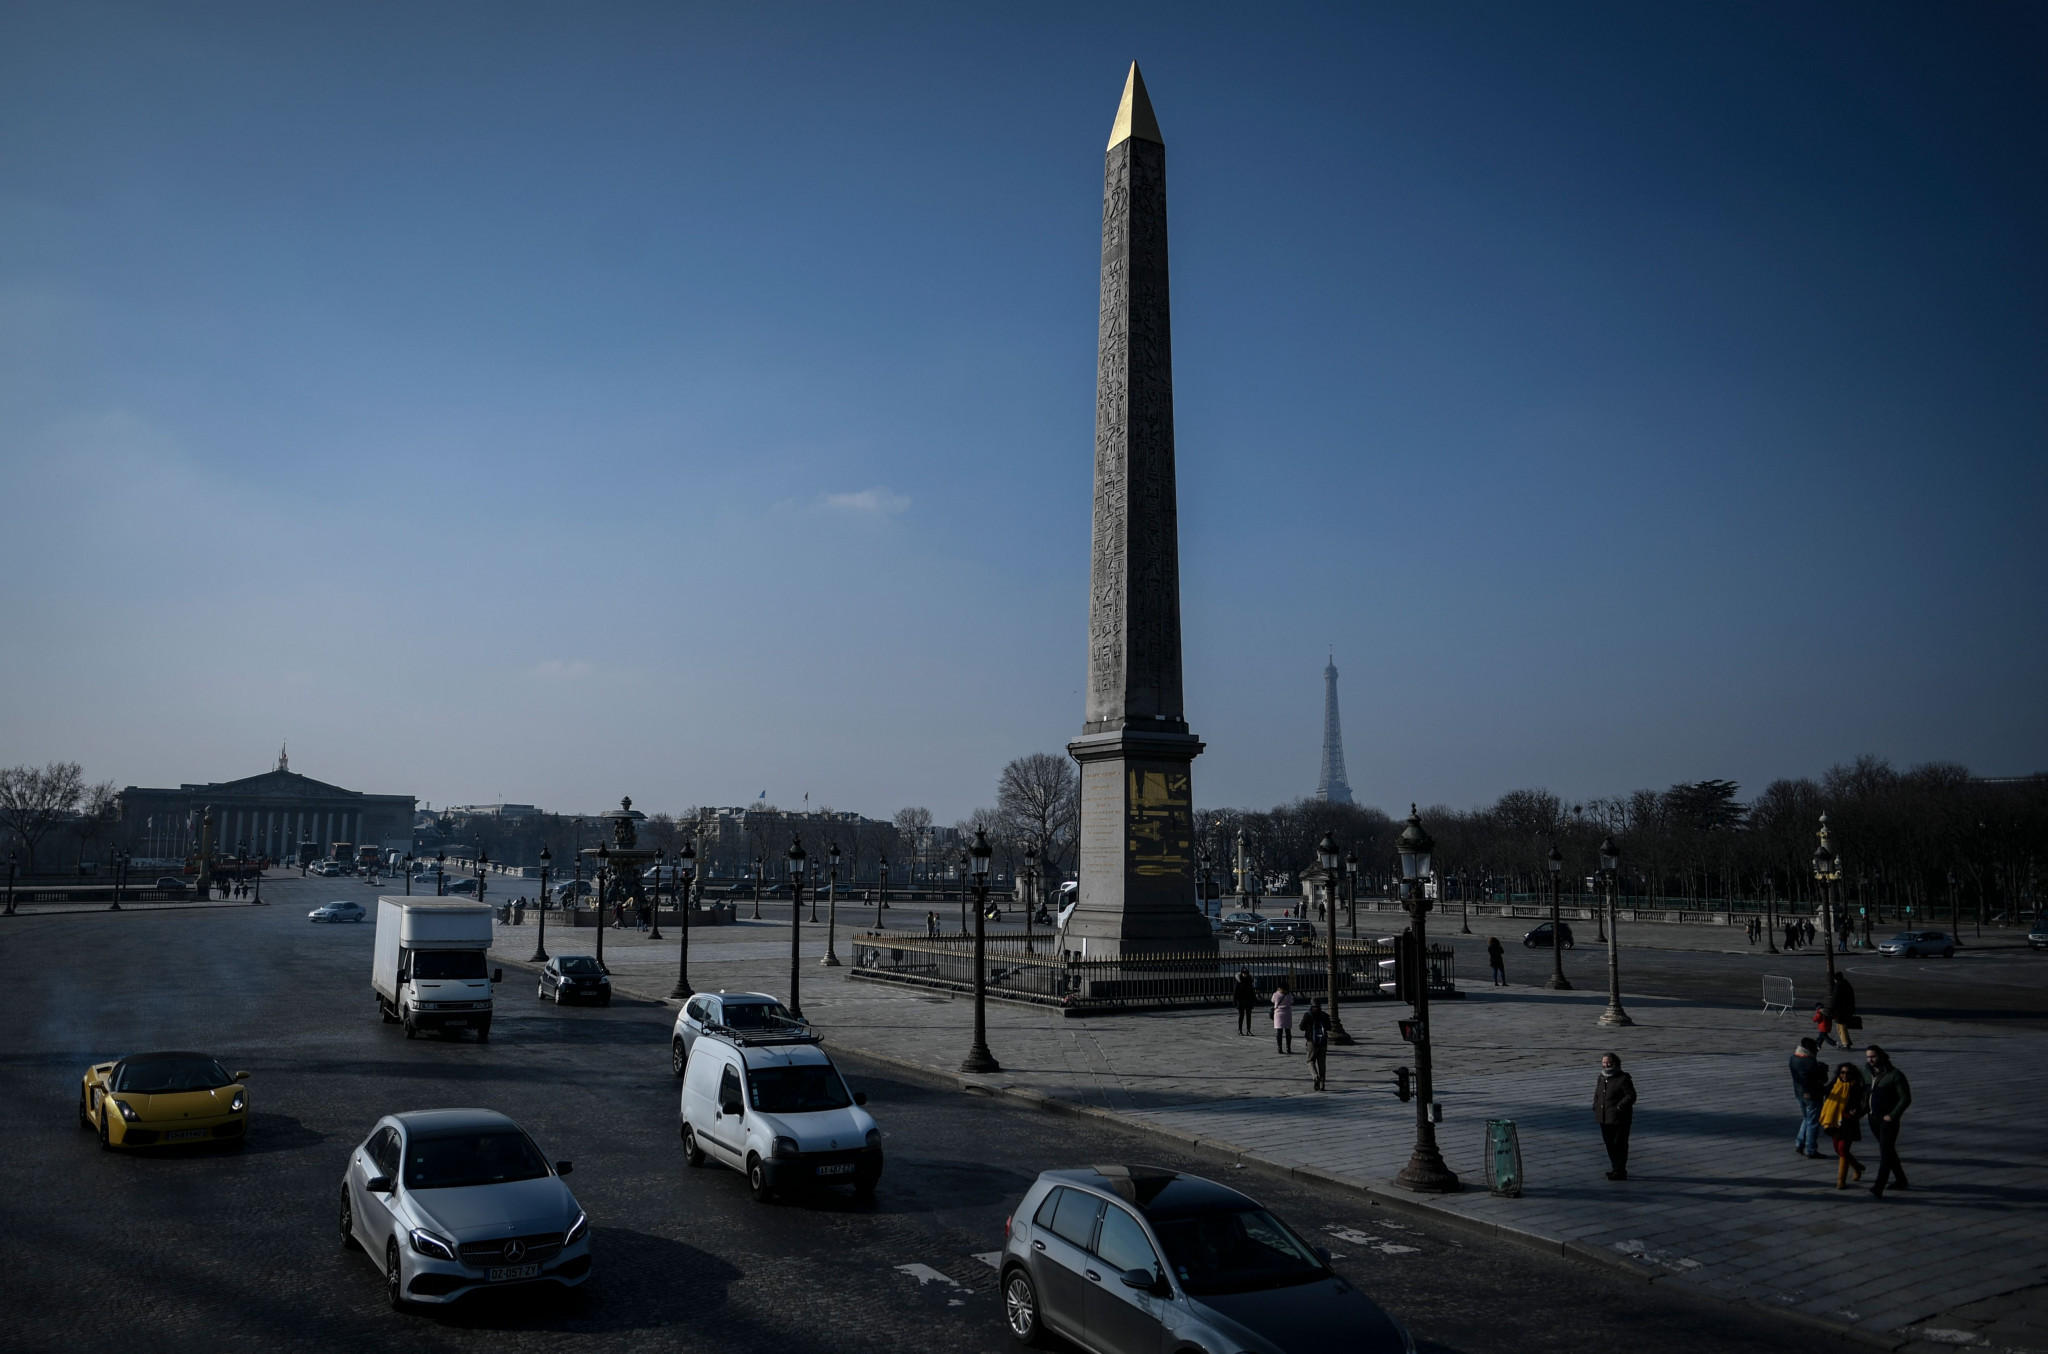 The Place de la Concorde Luxor Obelisk is set to provide the setting for the breaking finals at Paris 2024 ©Getty Images